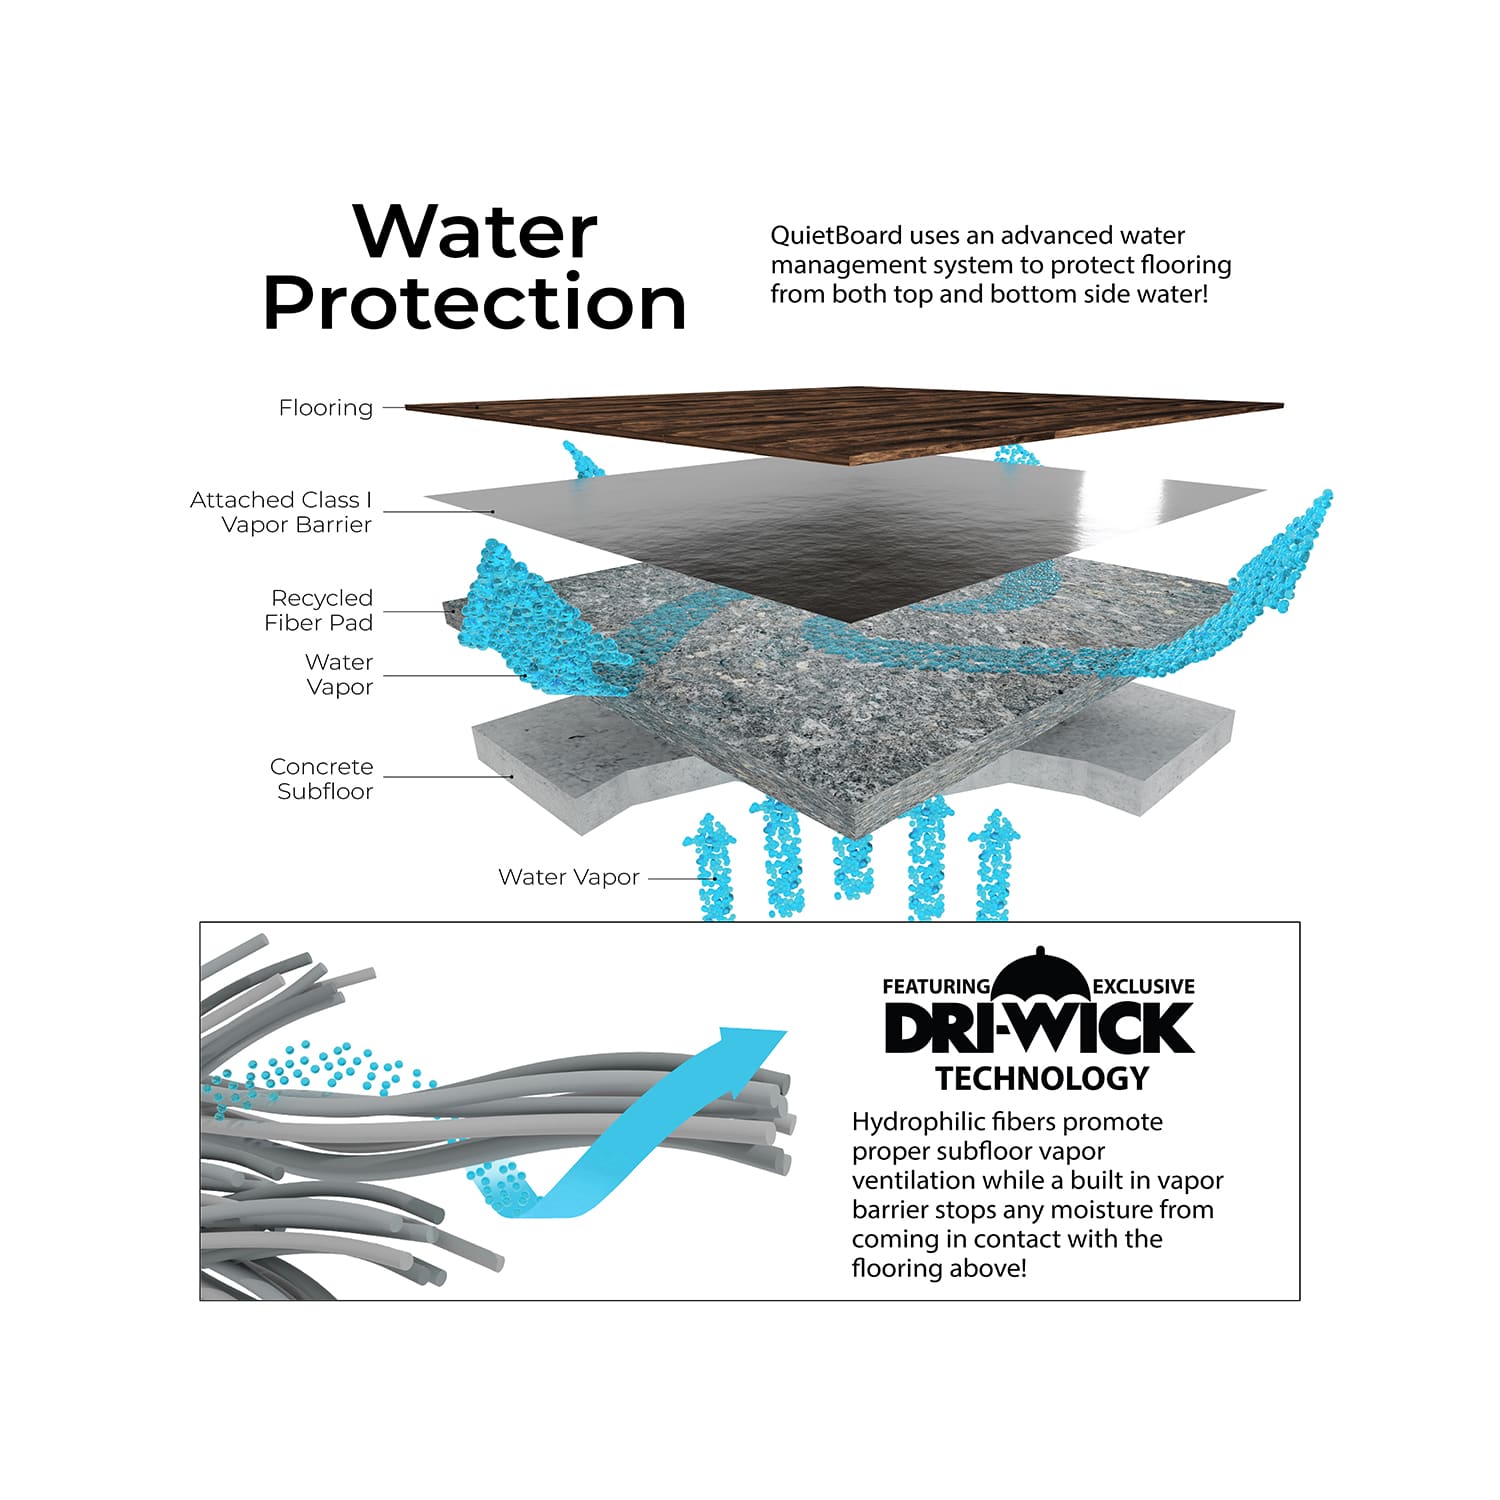 QuietBoard Dri-Wick Water Protection Image